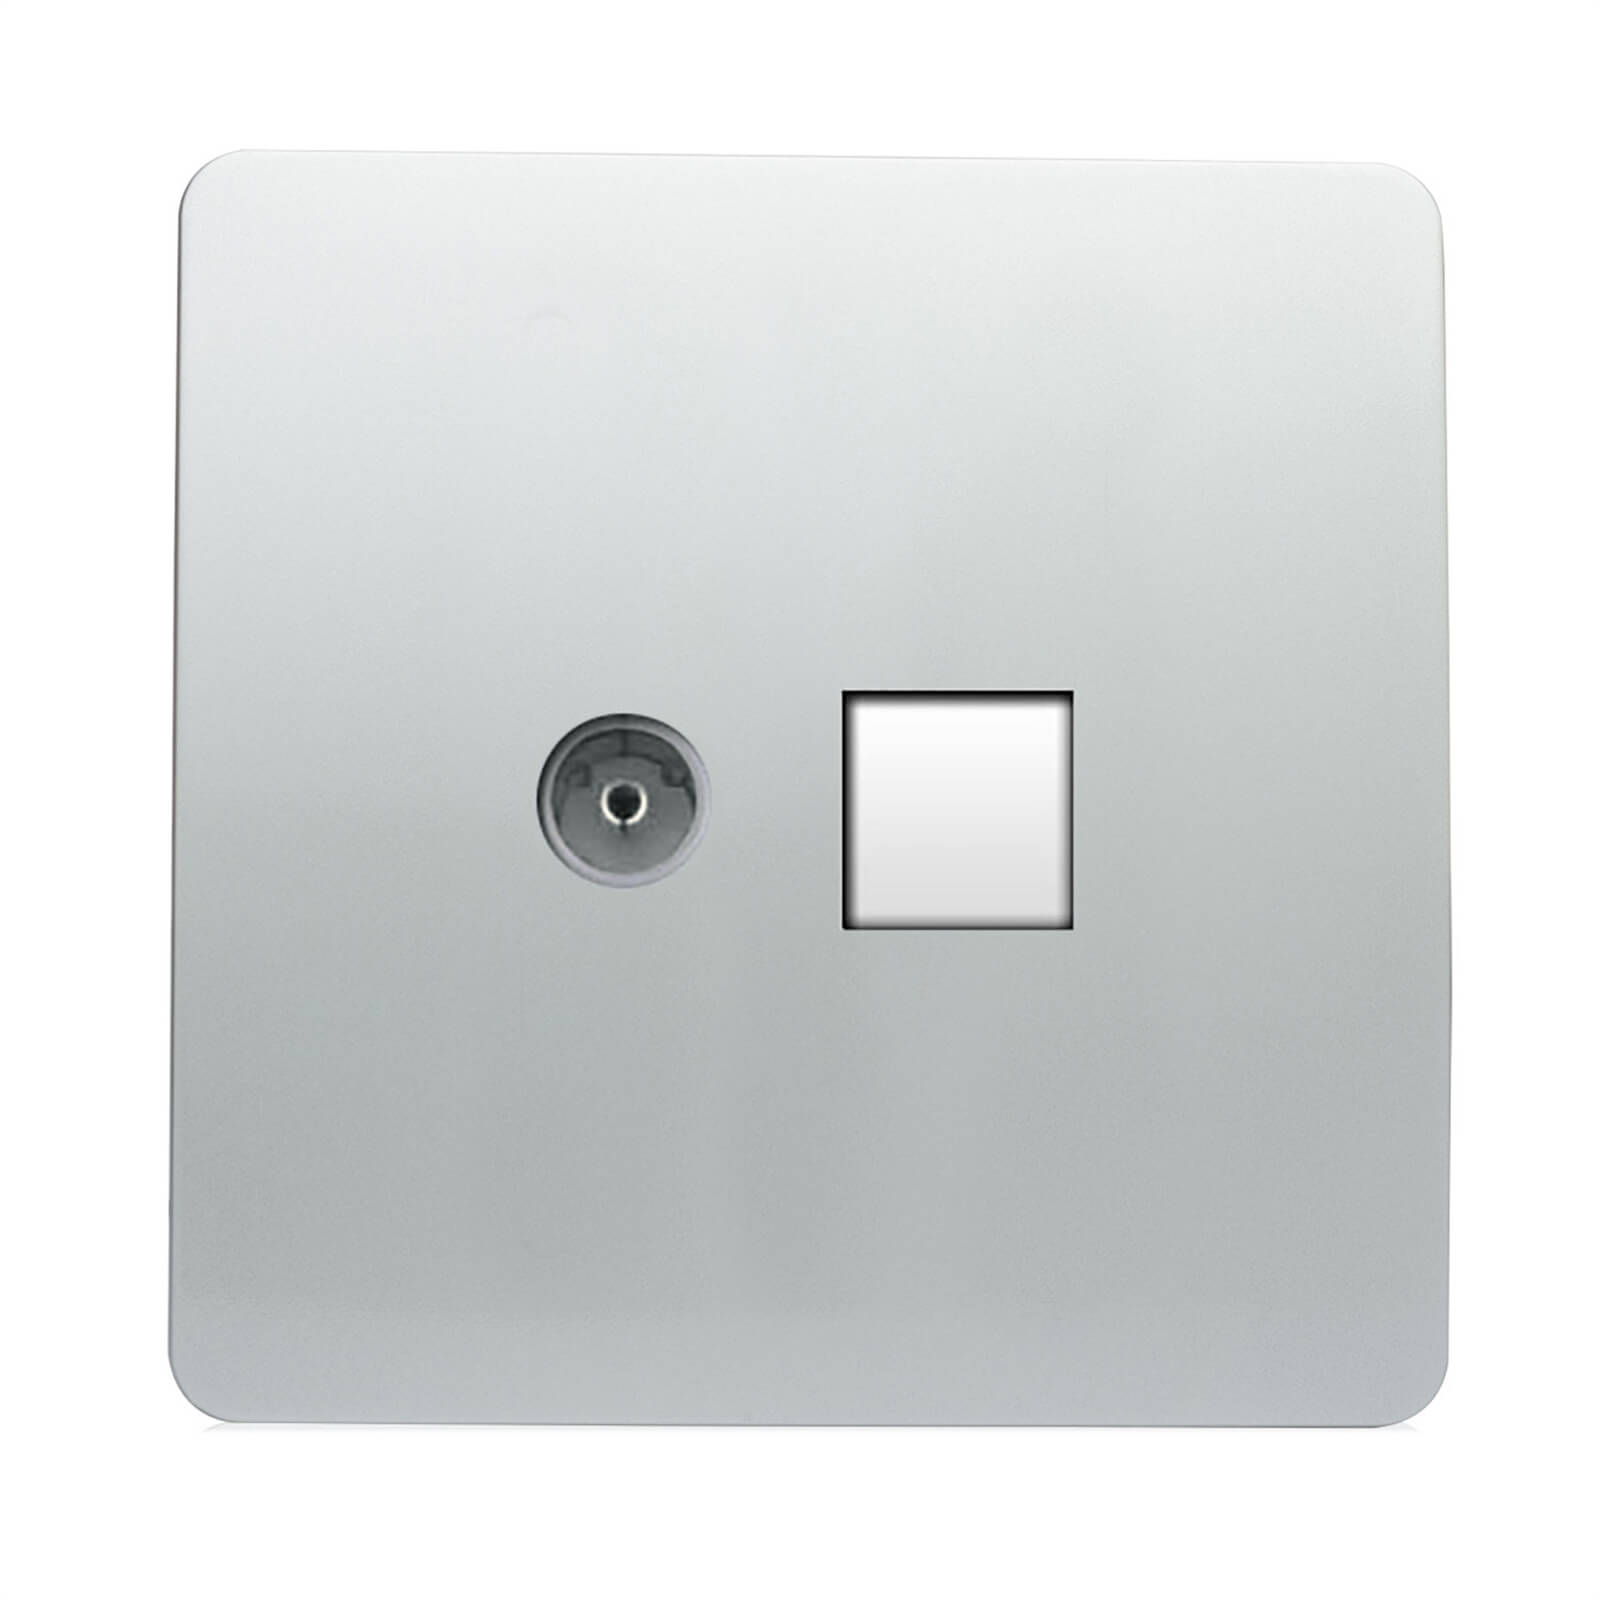 Trendi Switch TV Co-axial and Telephone Sockets in Screwless Silver